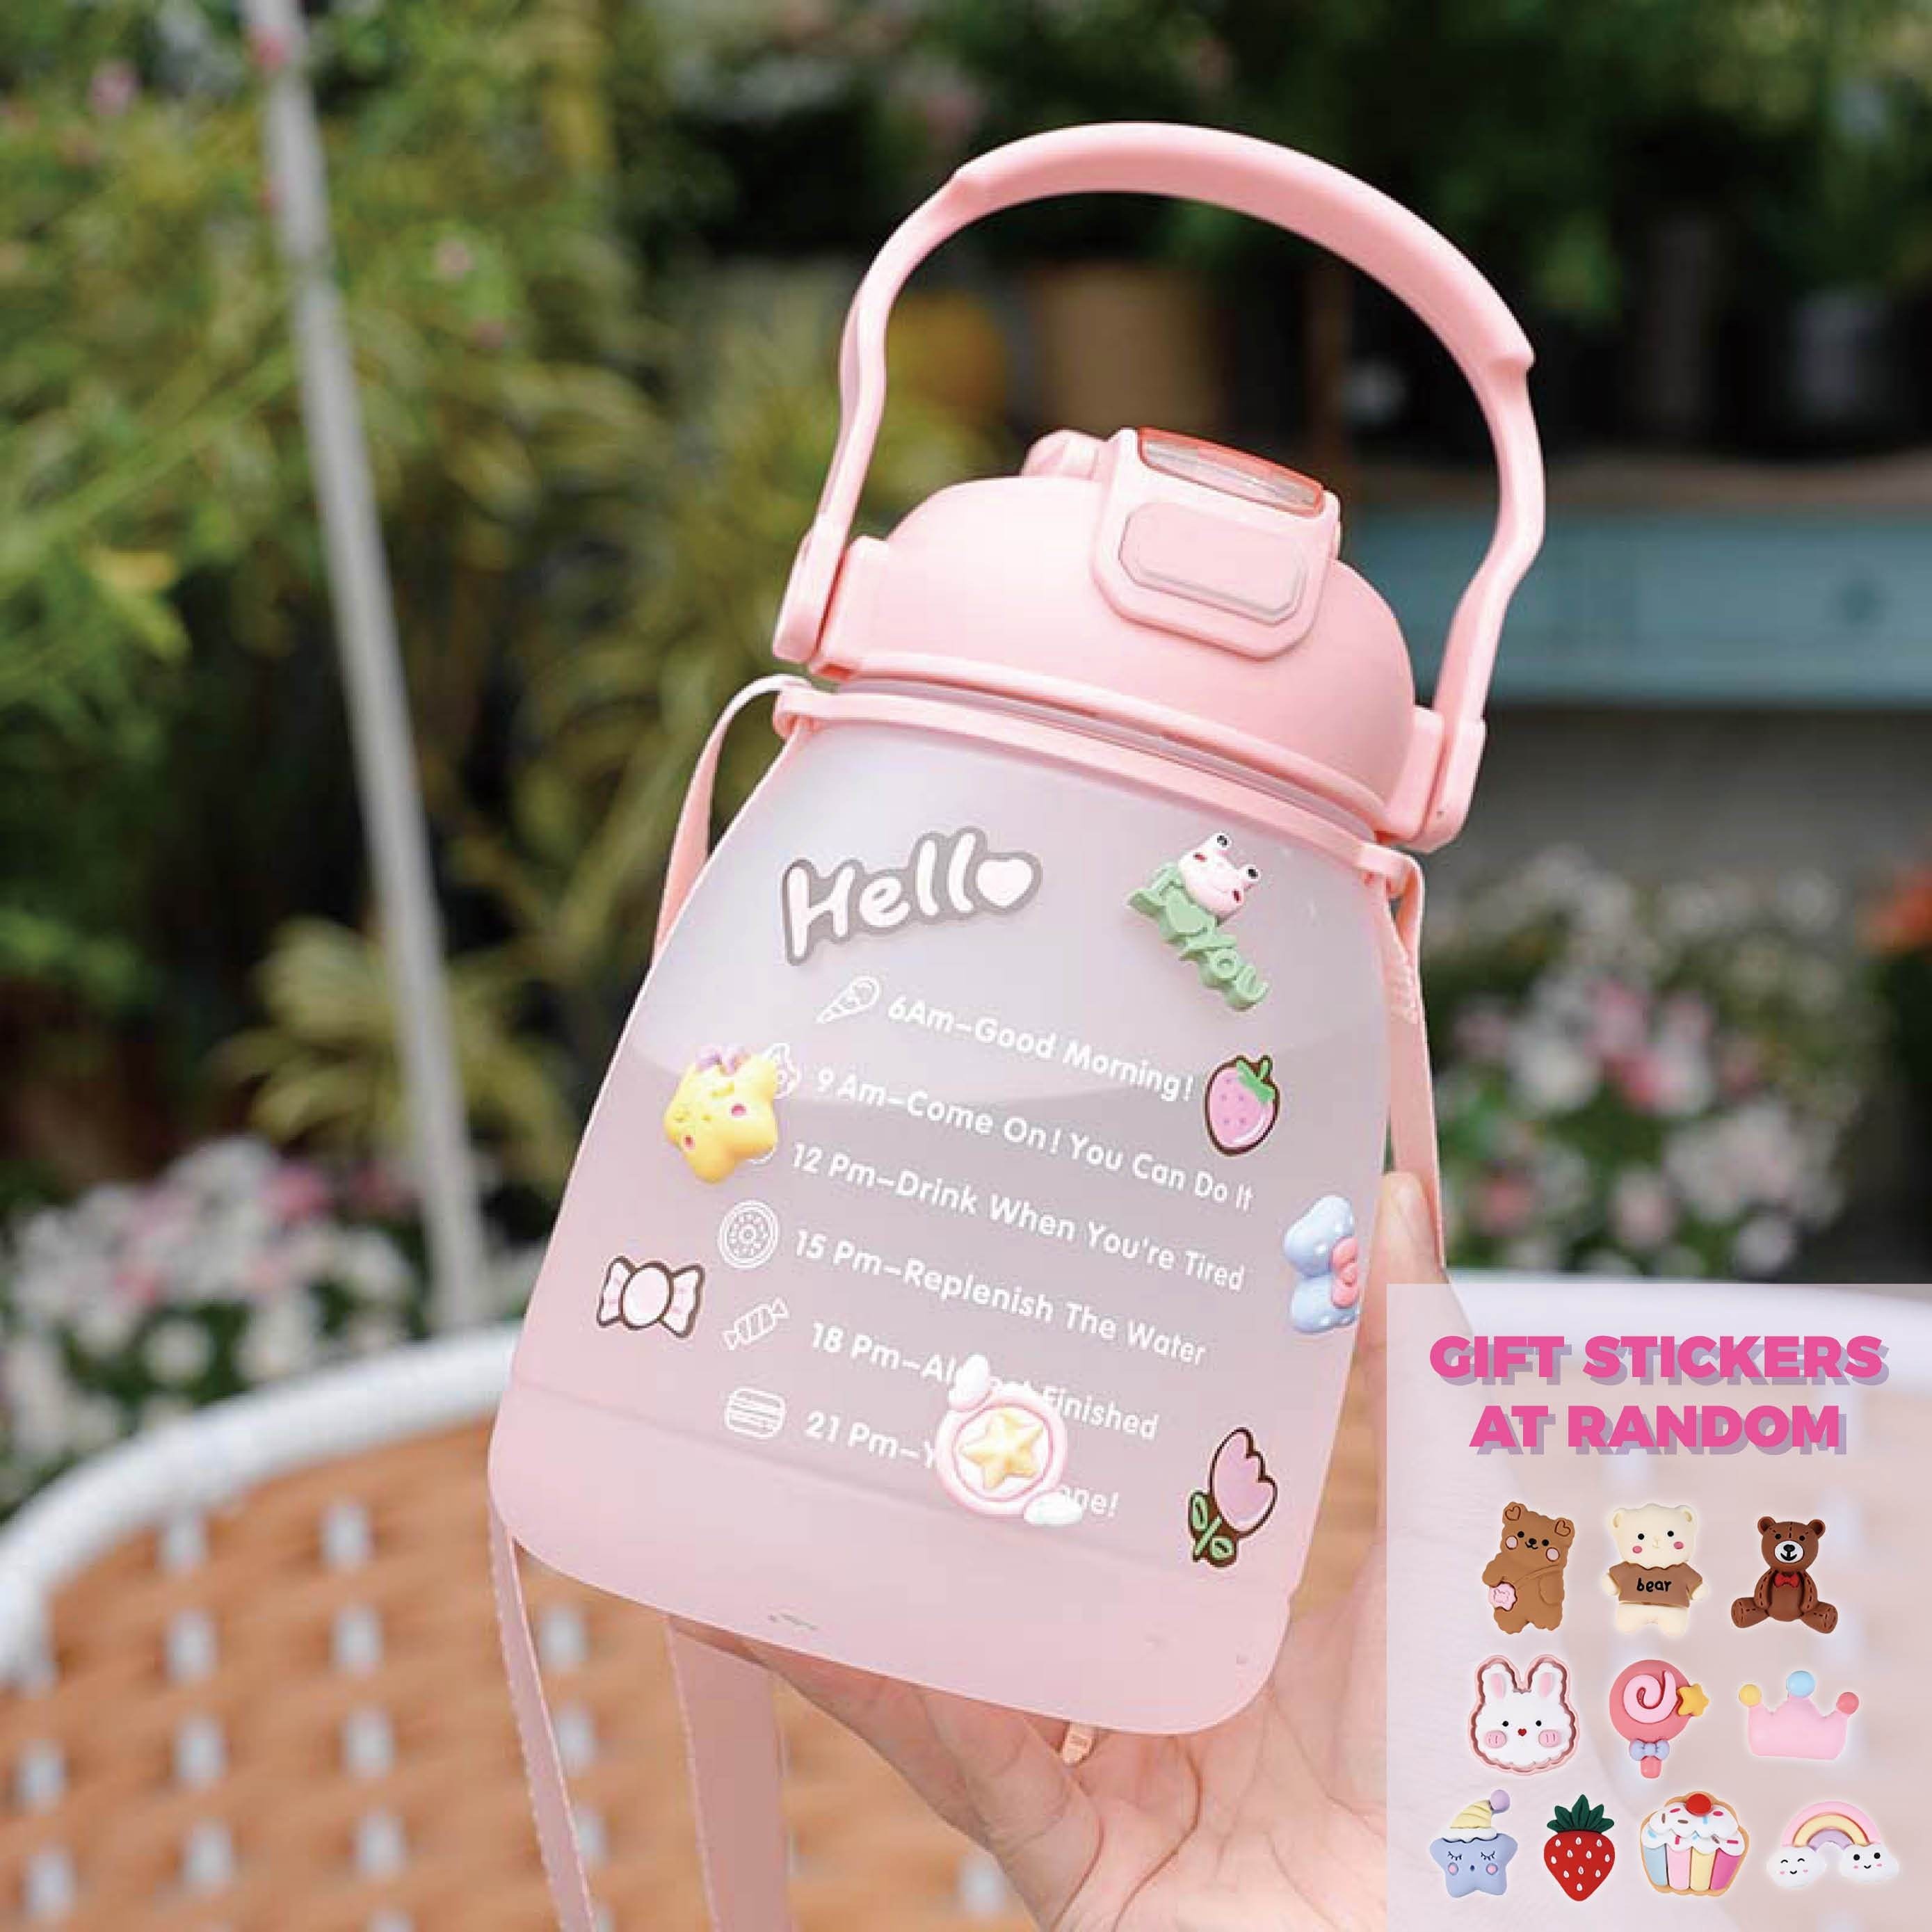 Creative Cute Mobile Phone Straw Water Bottle With Strap Portable